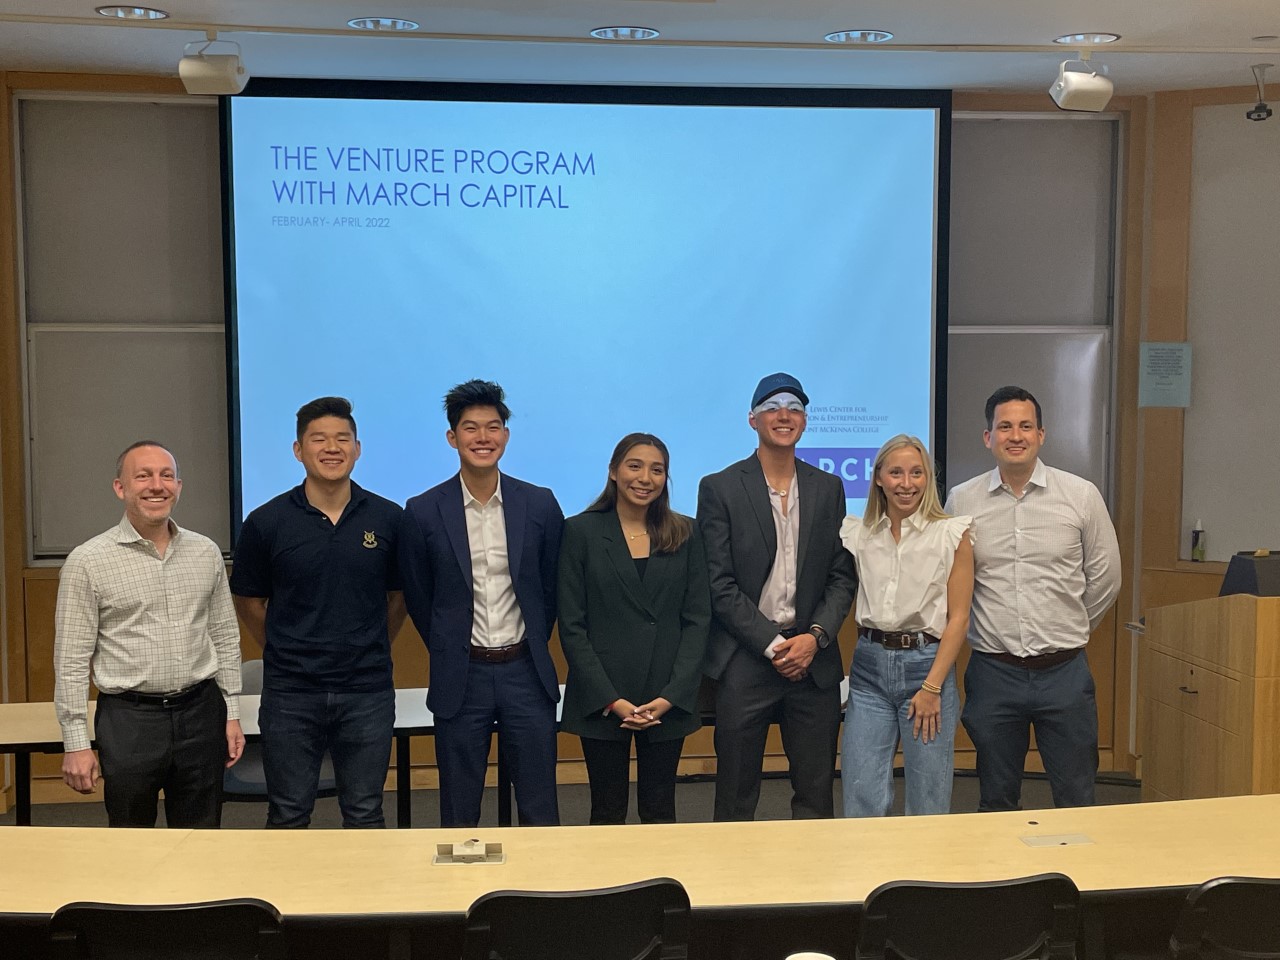 Spring 2022 winners for March Capital.